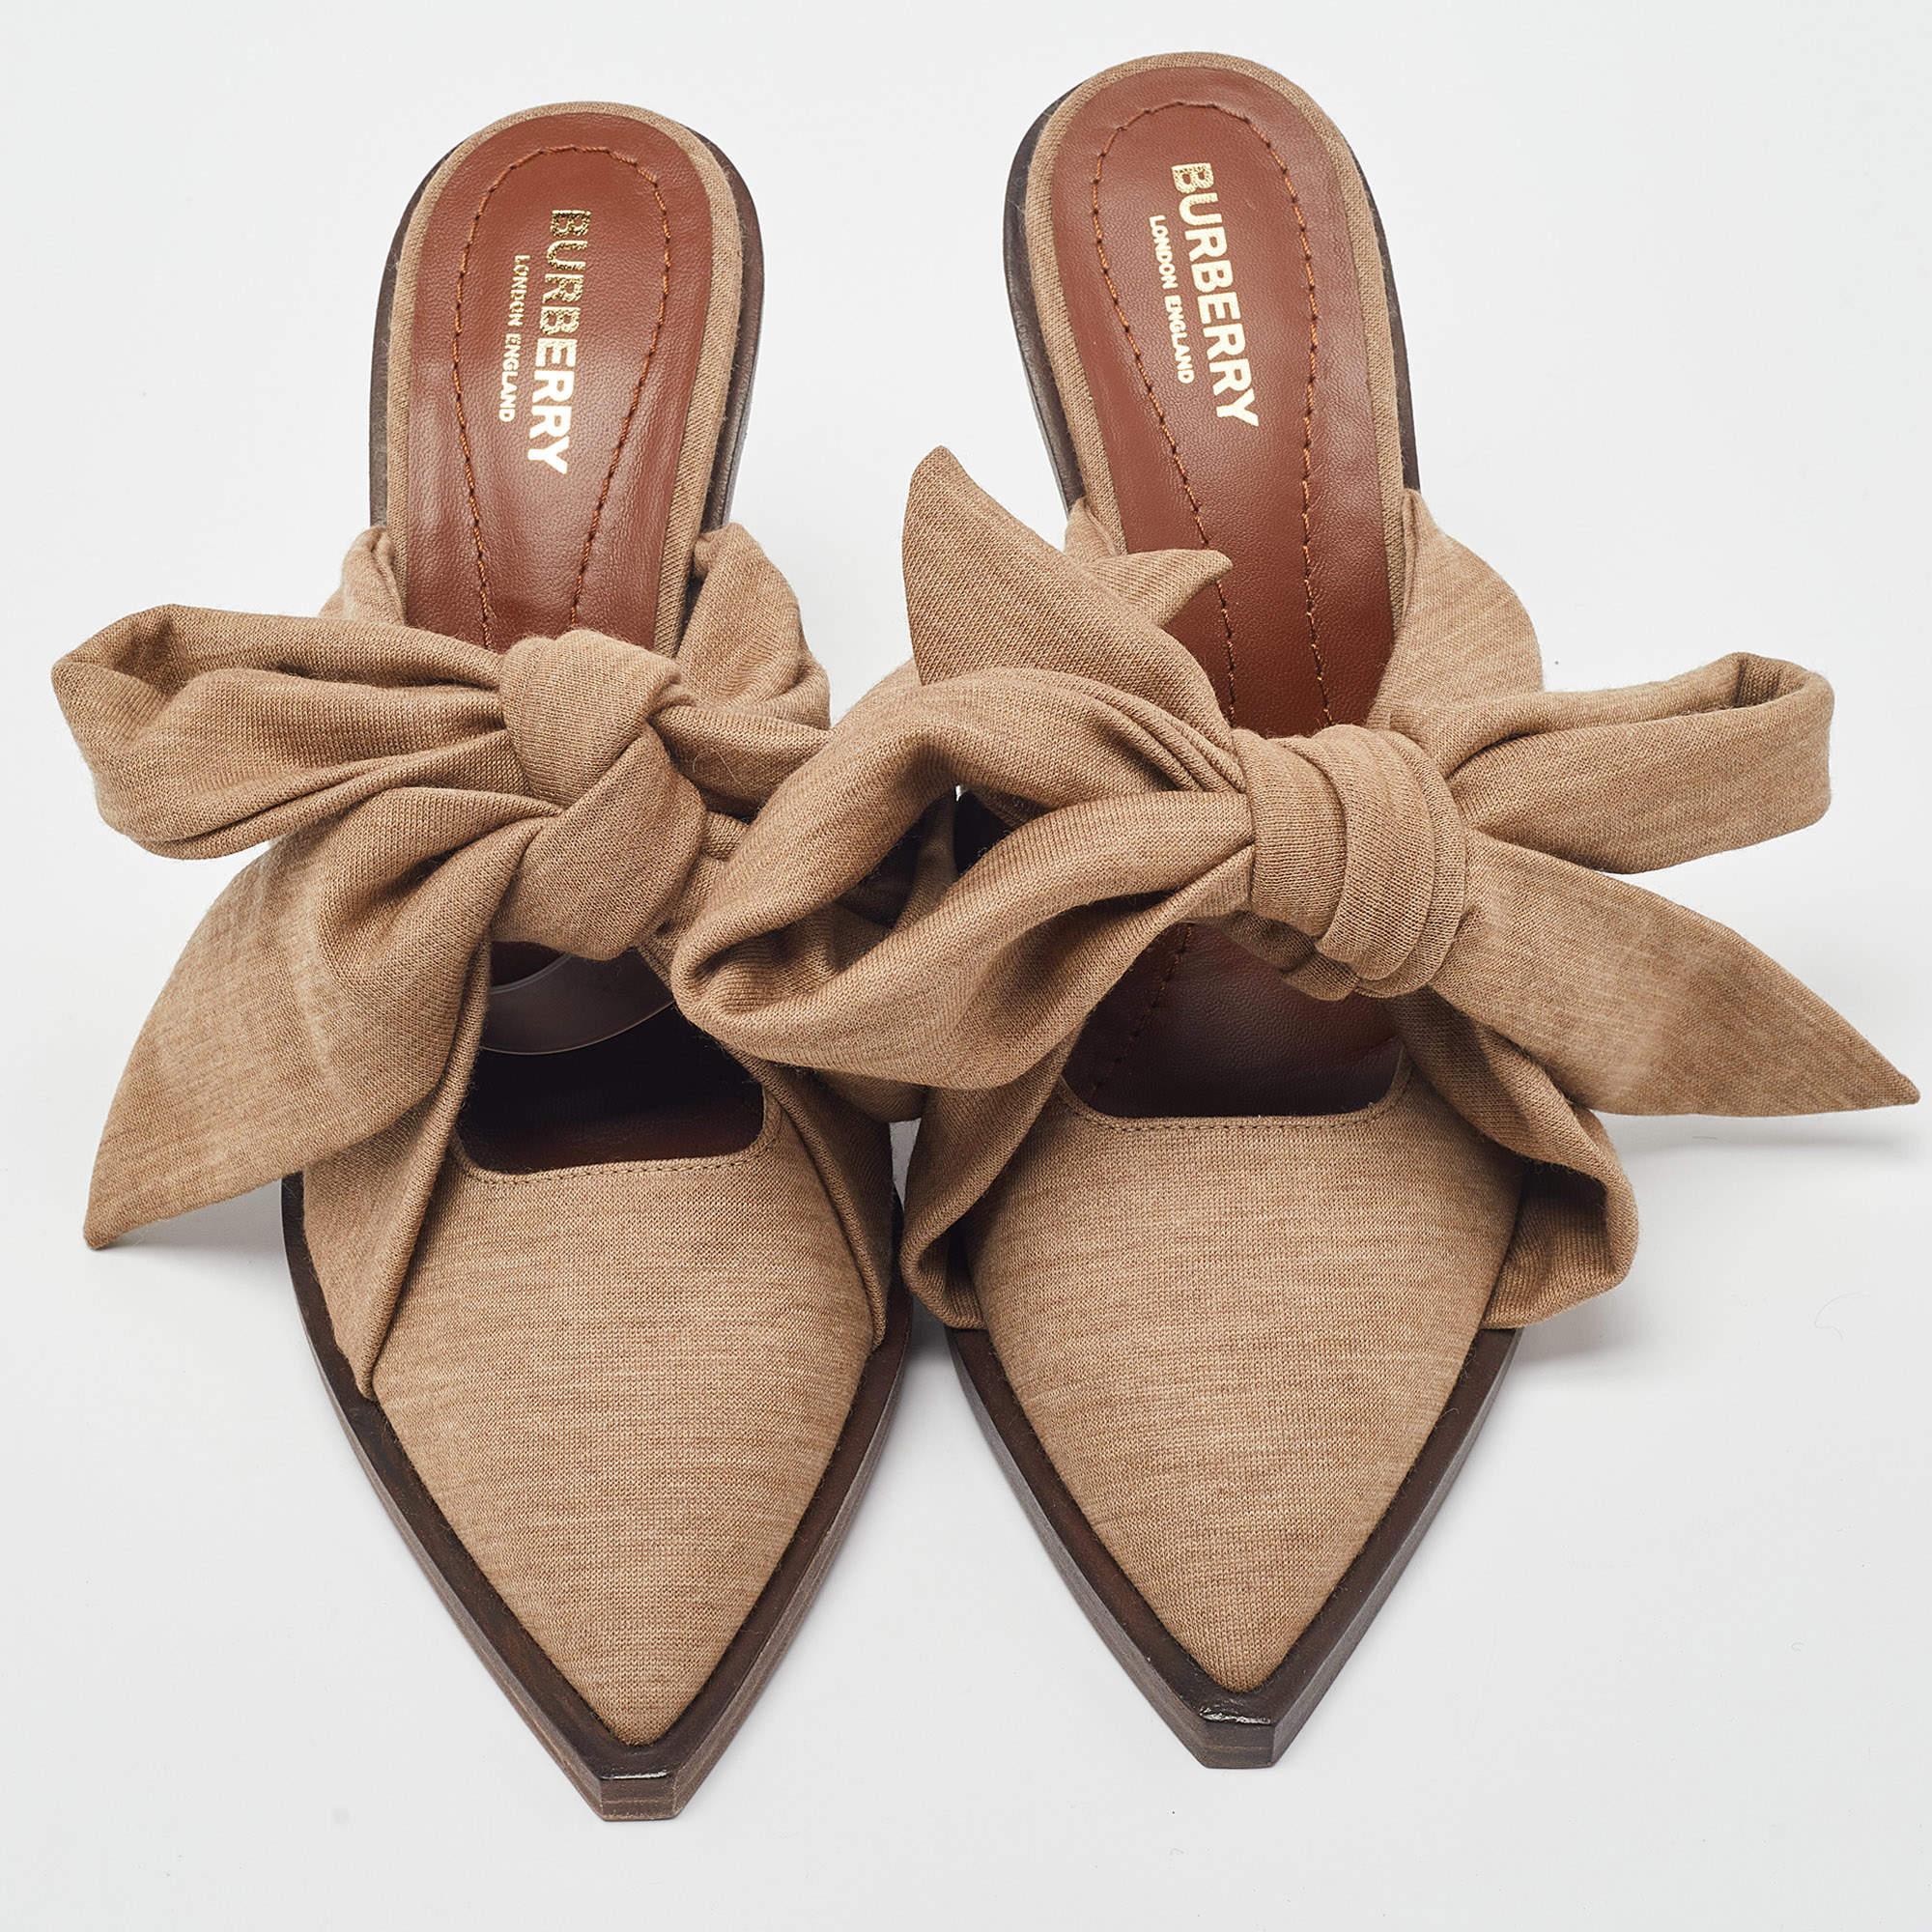 The Burberry mules are elegant and luxurious footwear. Crafted with rich brown fabric, they feature a stylish scarf tie detail that adds a touch of sophistication. These mules effortlessly blend comfort and style, making them a versatile choice for